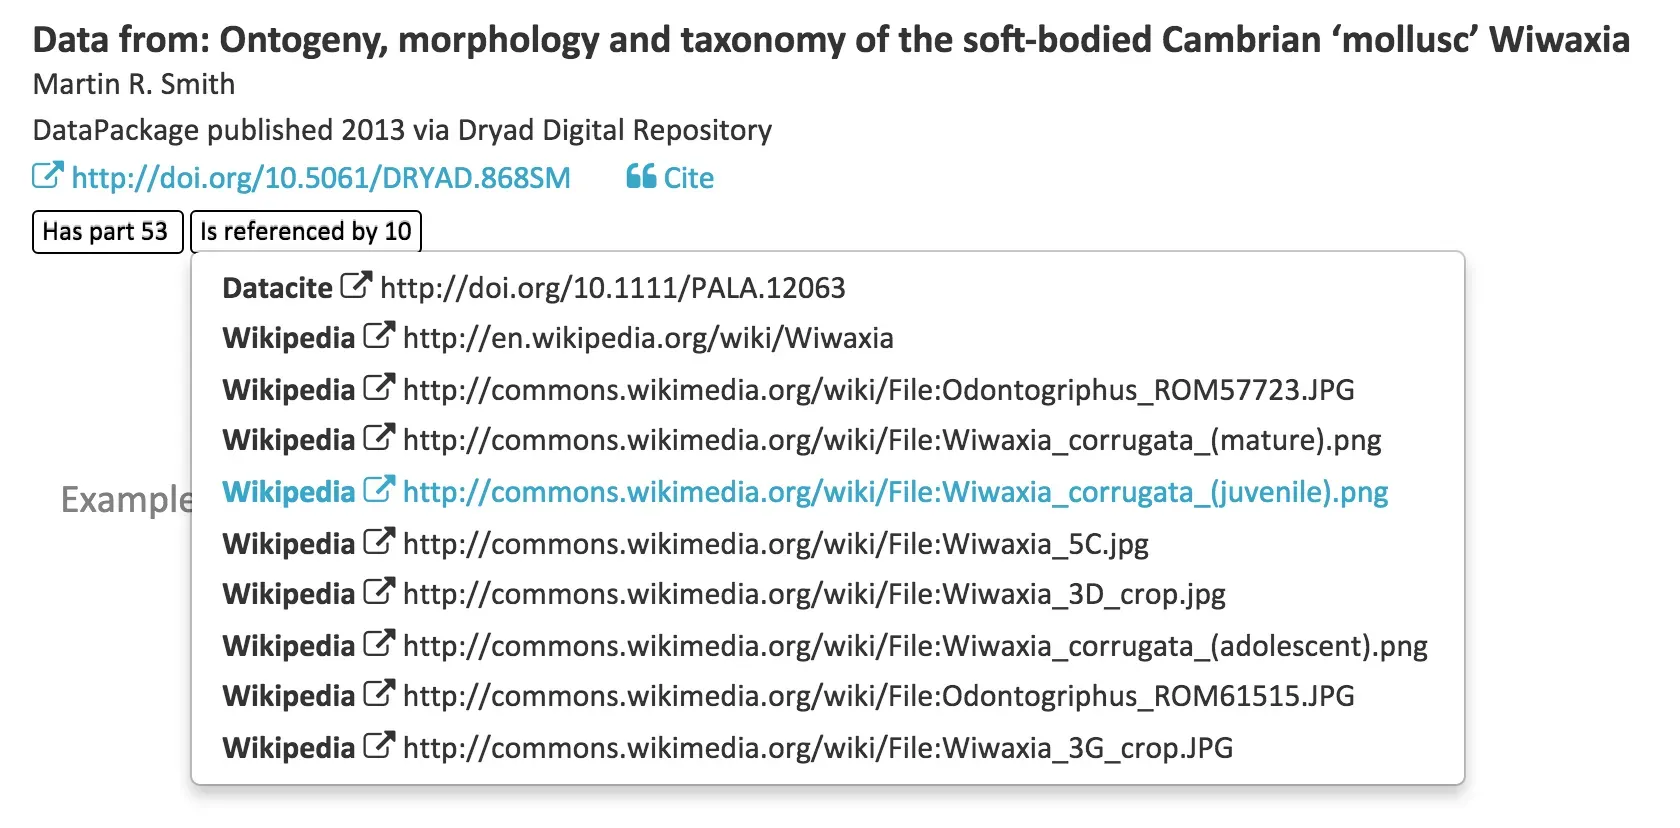 Data from: ontogeny, morphology and taxonomy